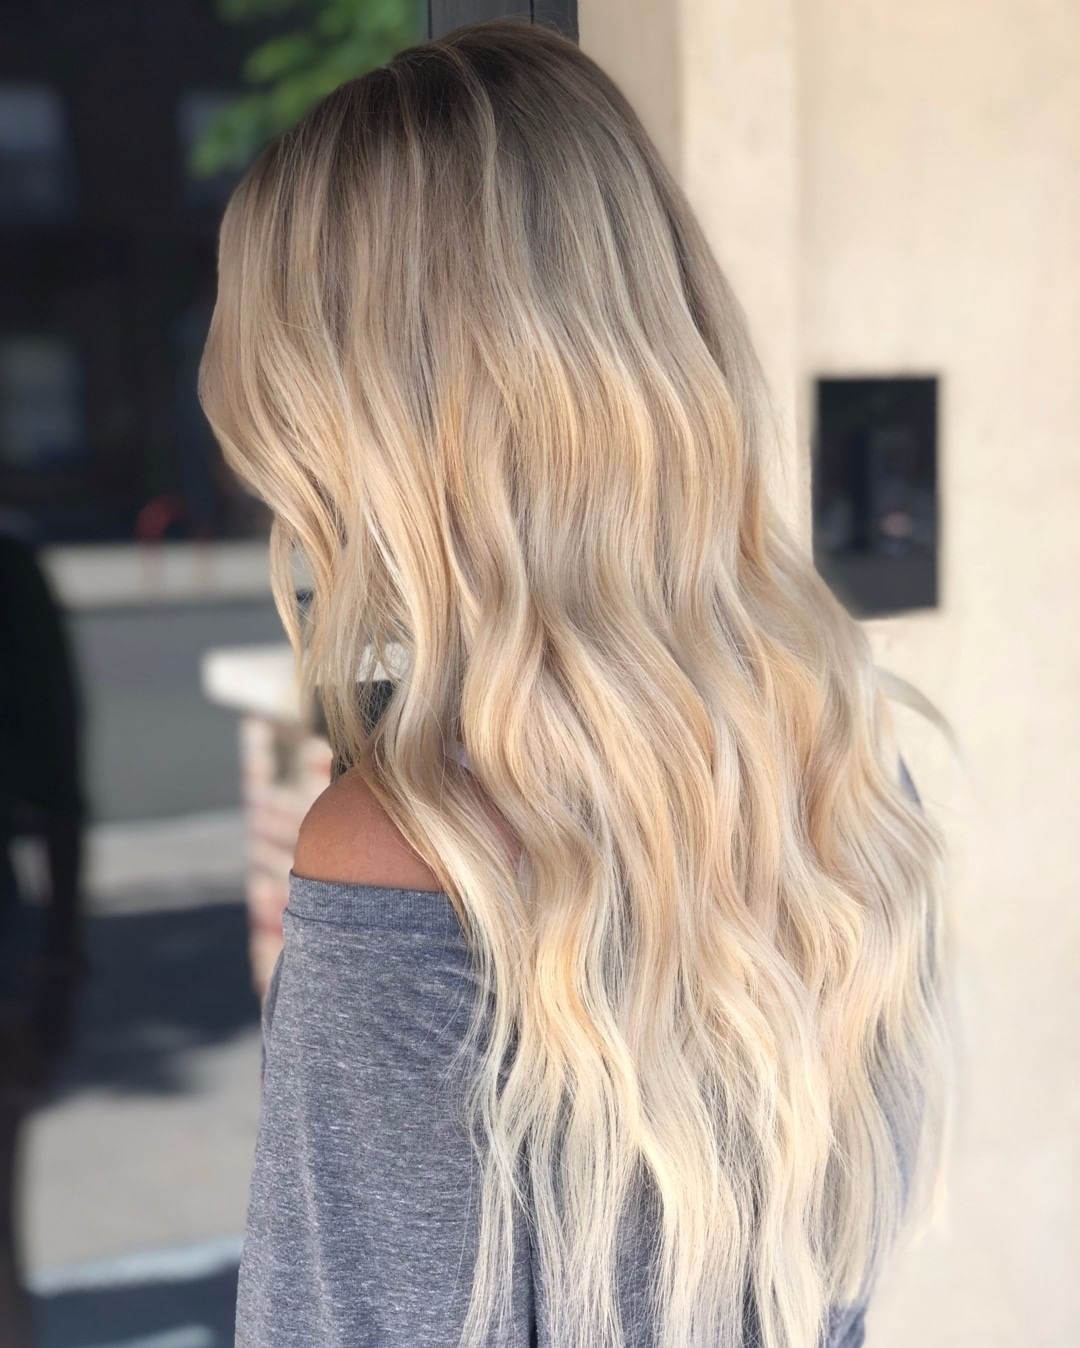 9 Trendy Long Blonde Hairstyles with Layers - Her Style Code